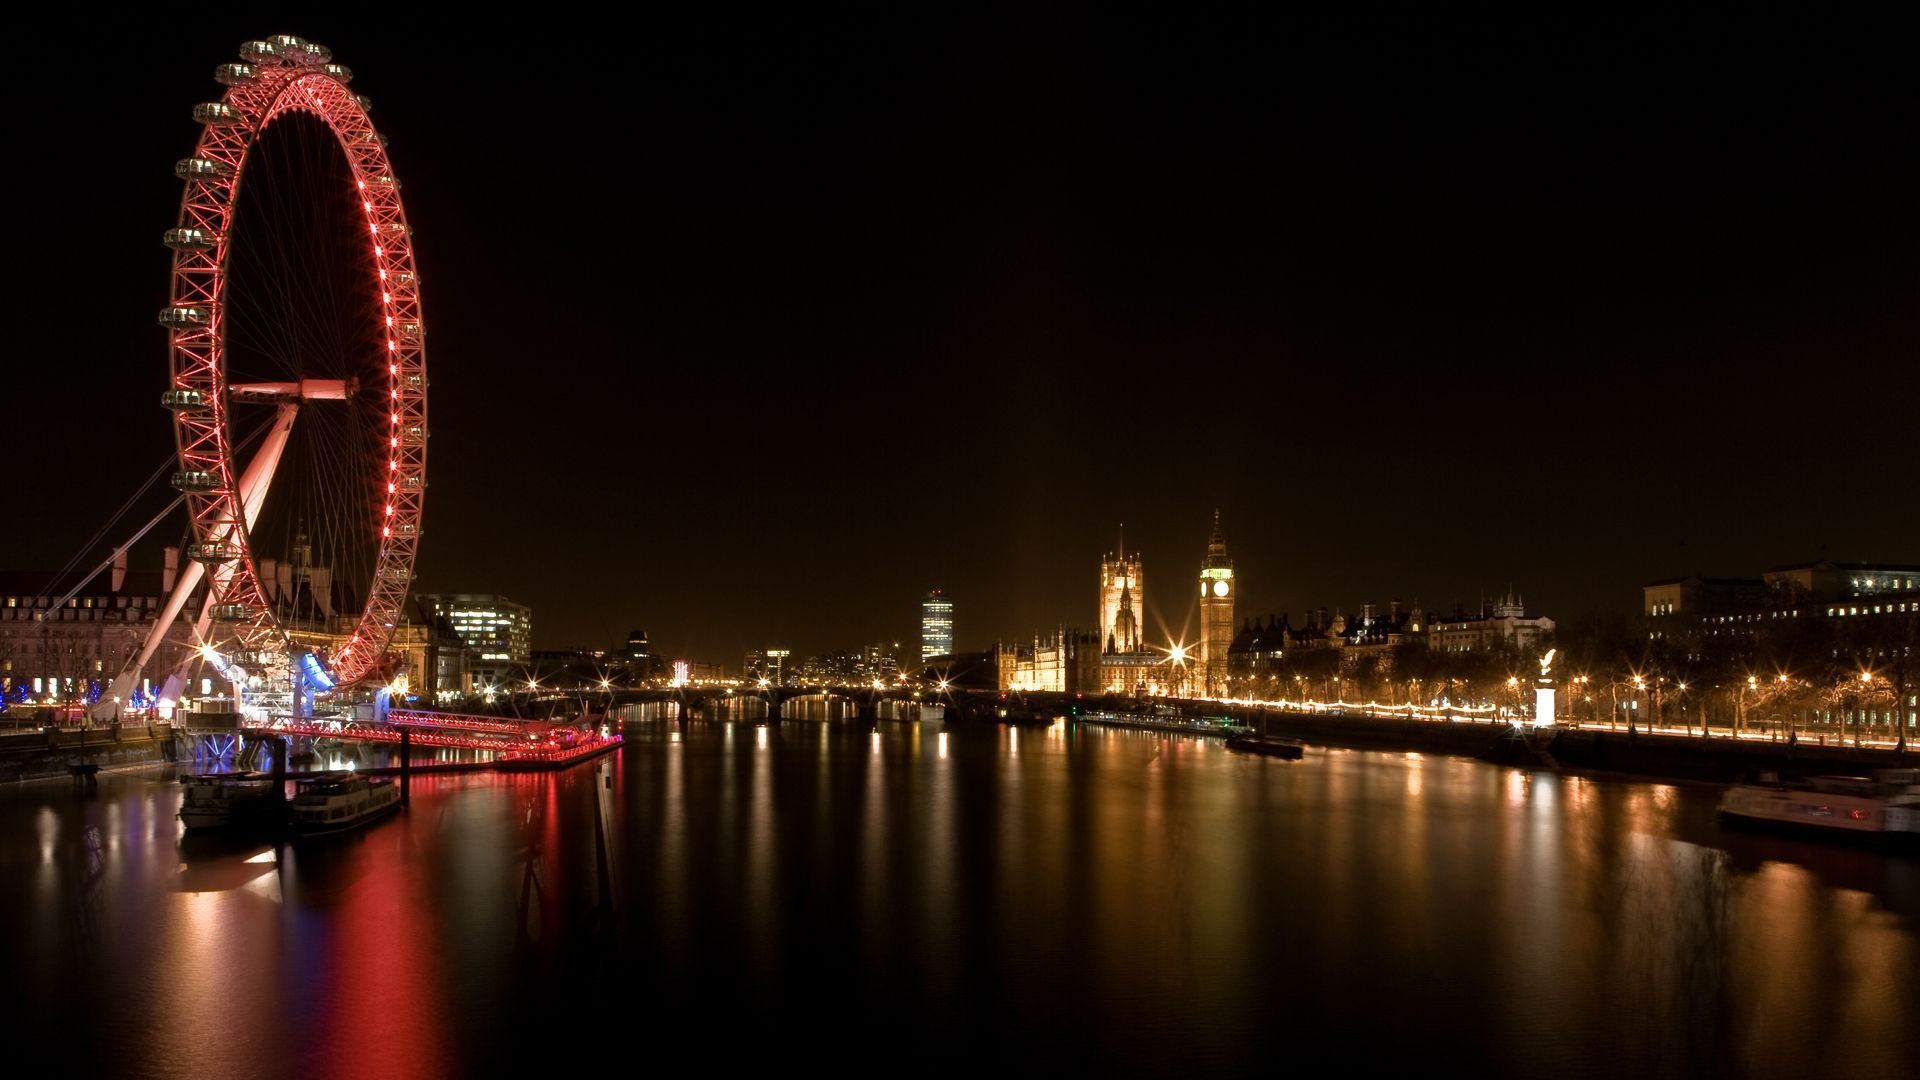 London | Free Desktop Wallpapers for HD, Widescreen and Mobile